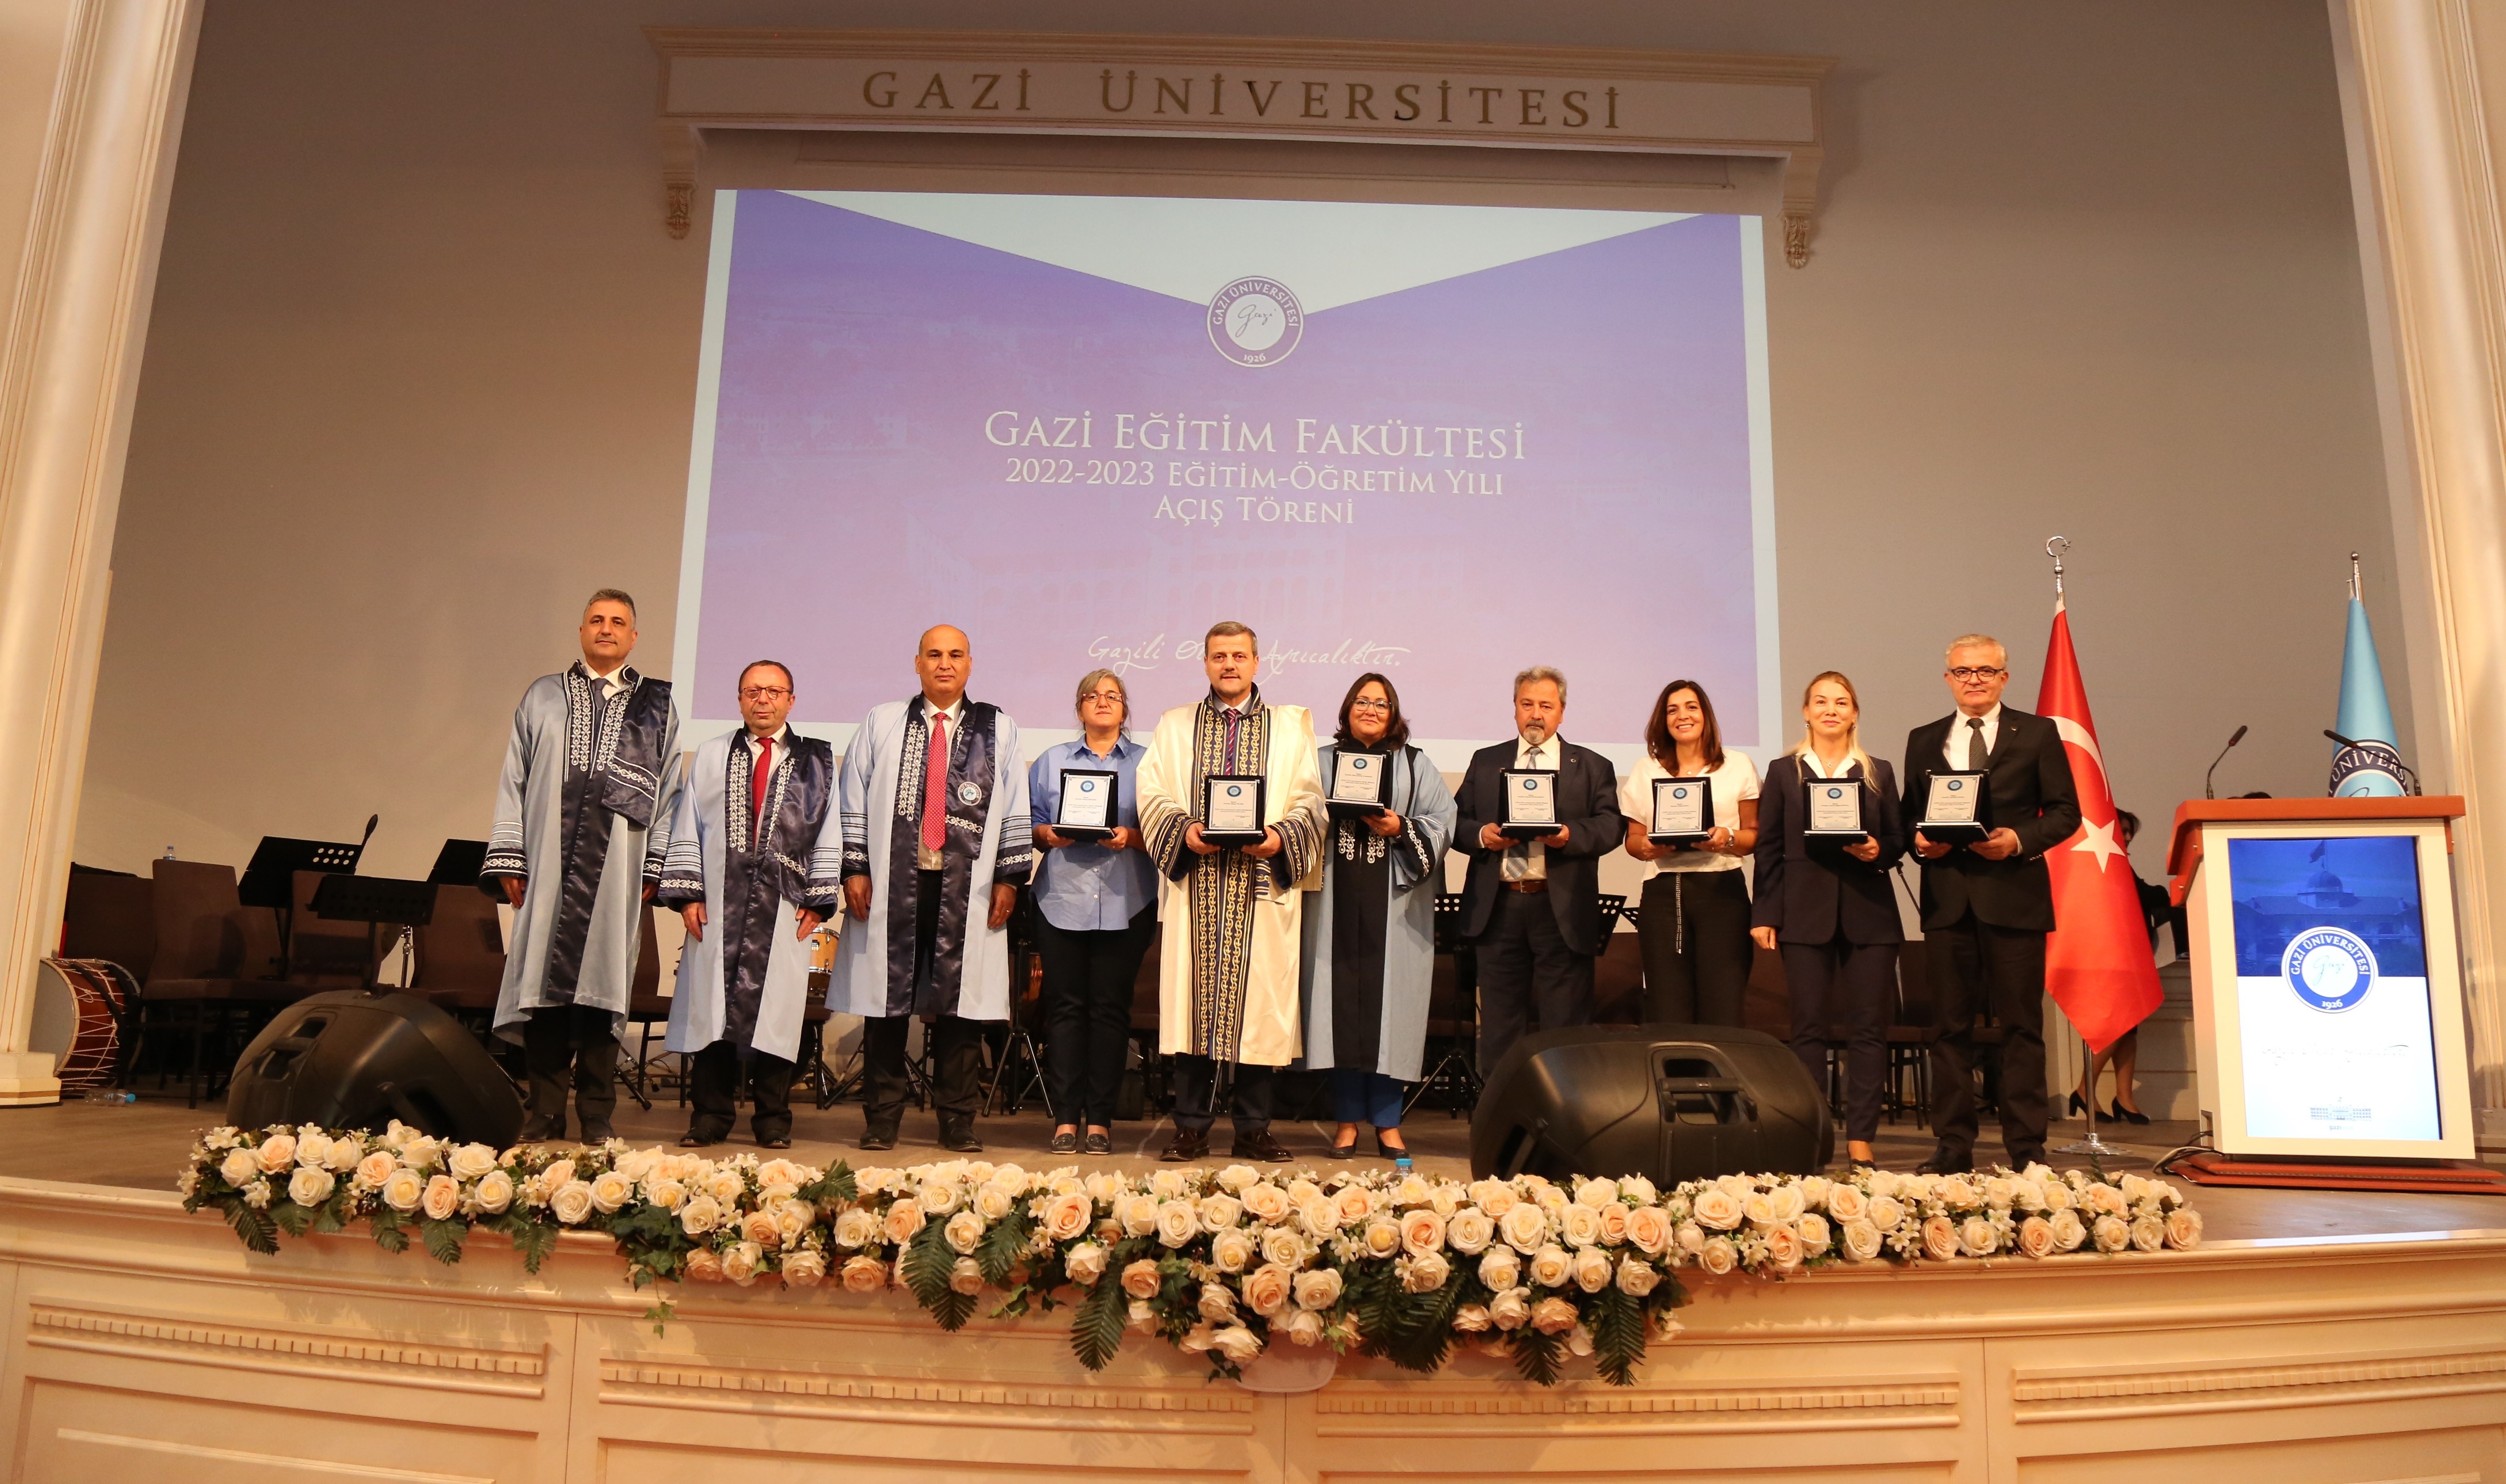 Gazi Education Faculty 2022-2023 Academic Year Fall Semester Opening Ceremony was held.-1